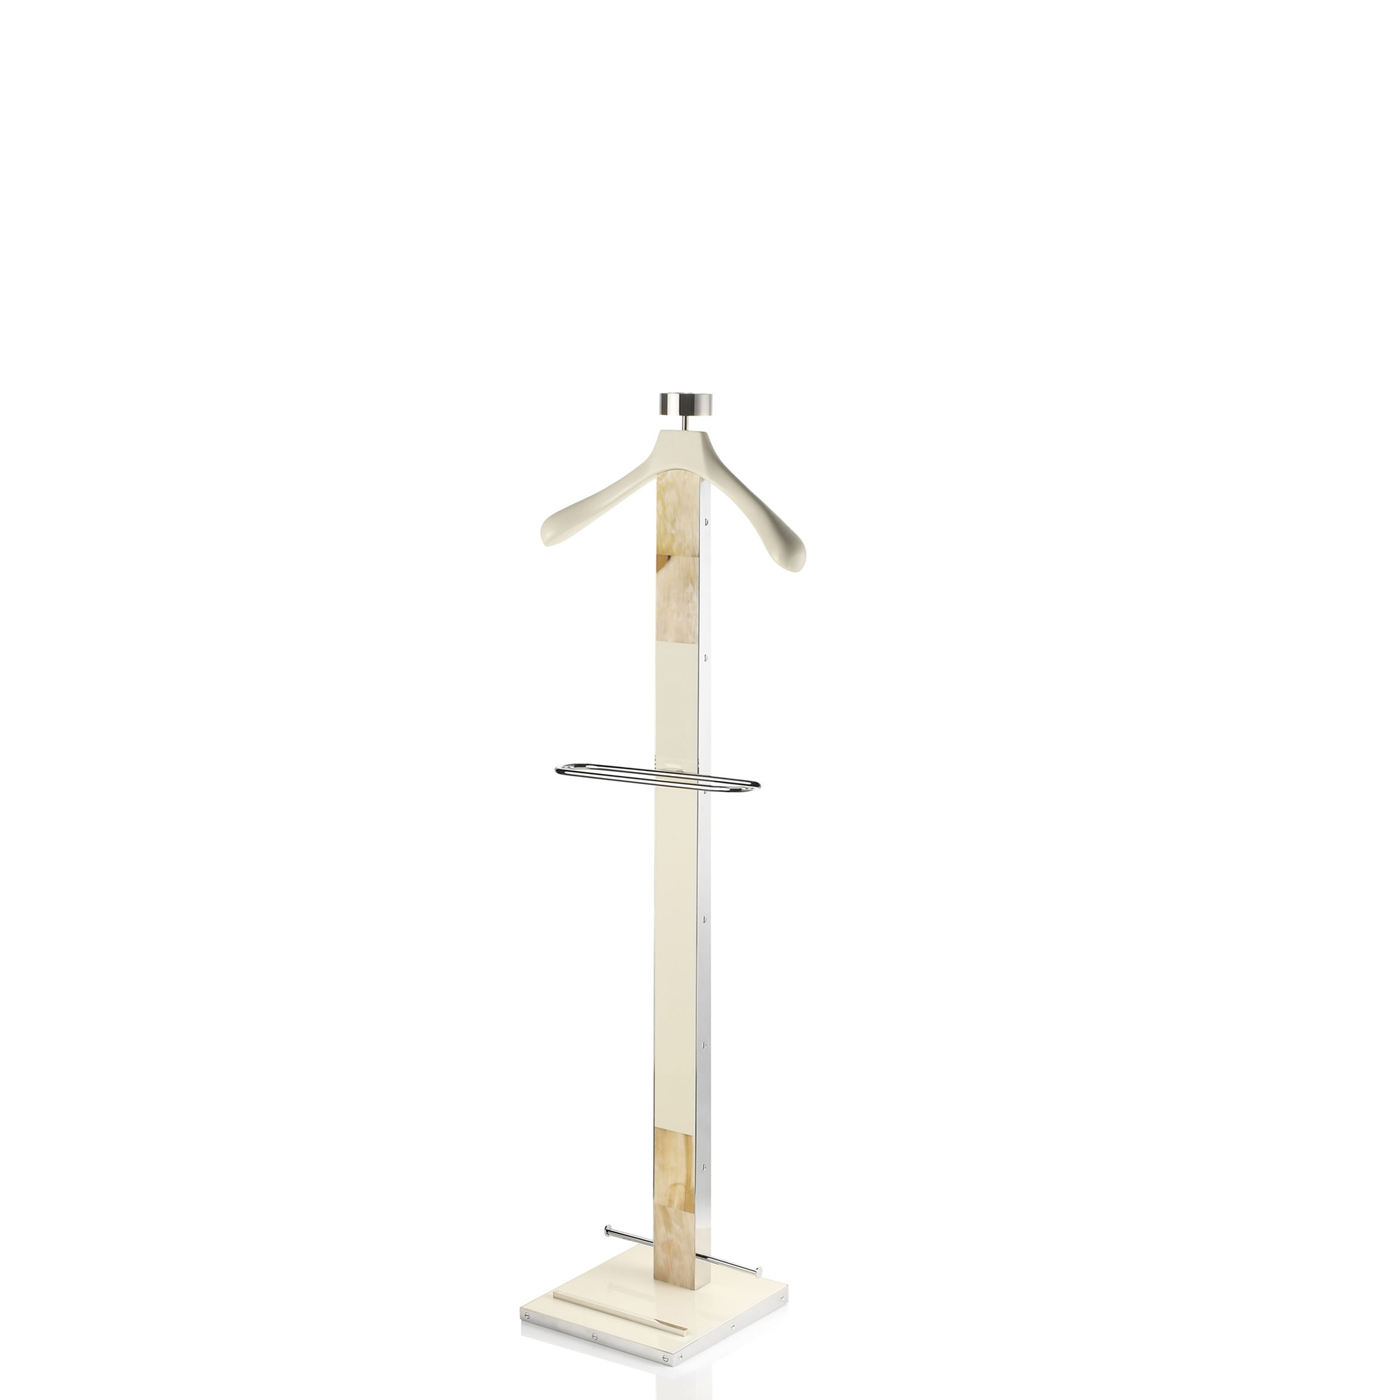 Coat stands and complementary furniture - Levanzo wardrobe valet in wood with lacquered ivory gloss finish and horn - Arcahorn